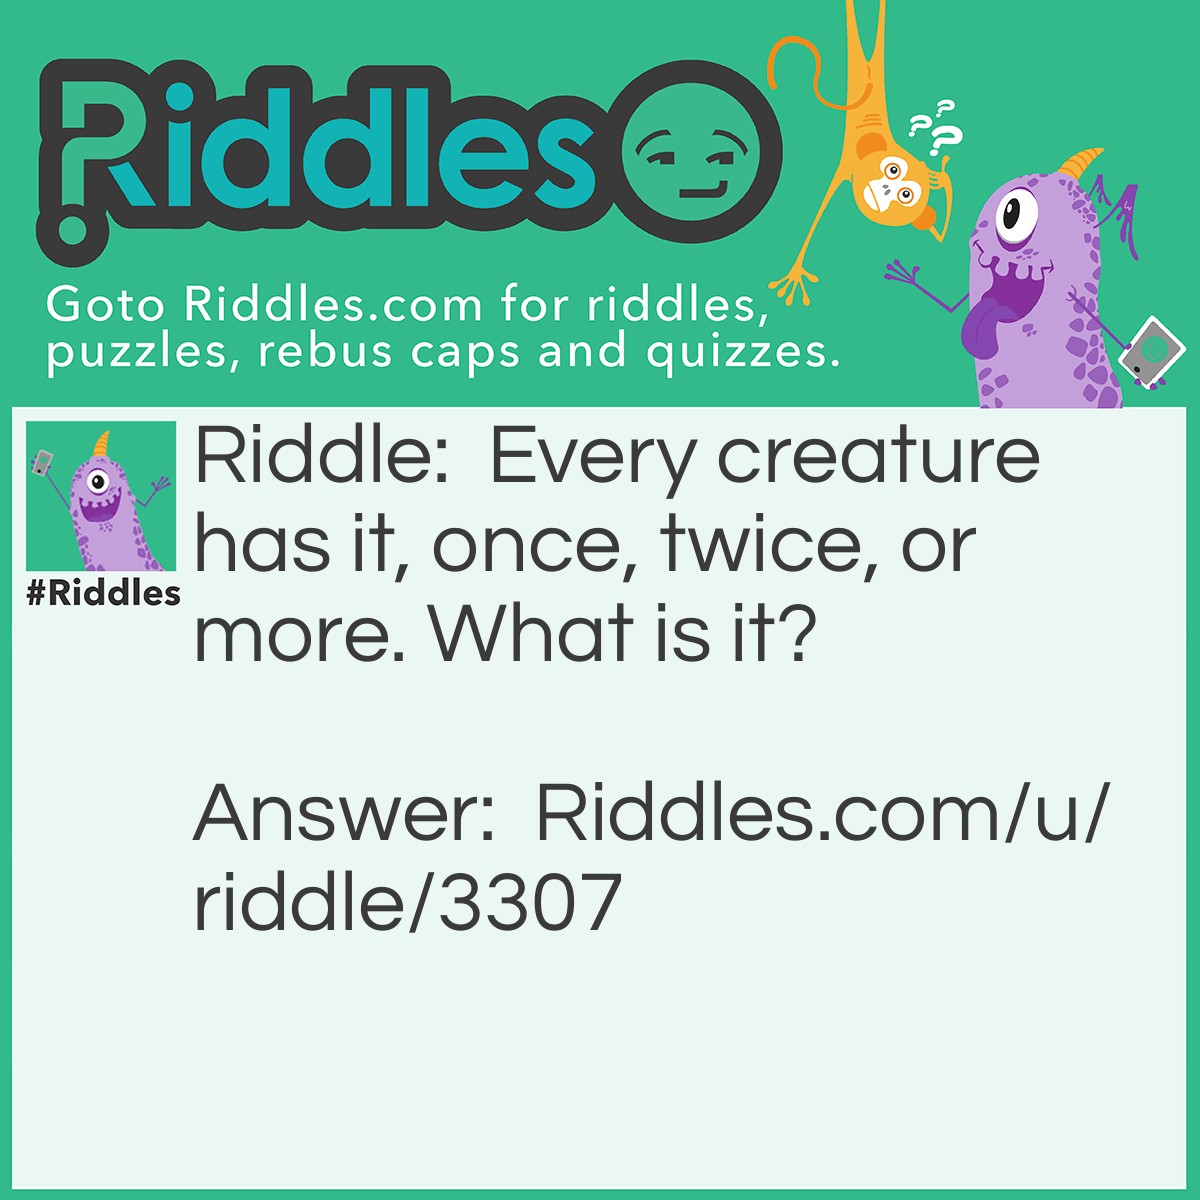 Riddle: Every creature has it, once, twice, or more. What is it? Answer: A name.